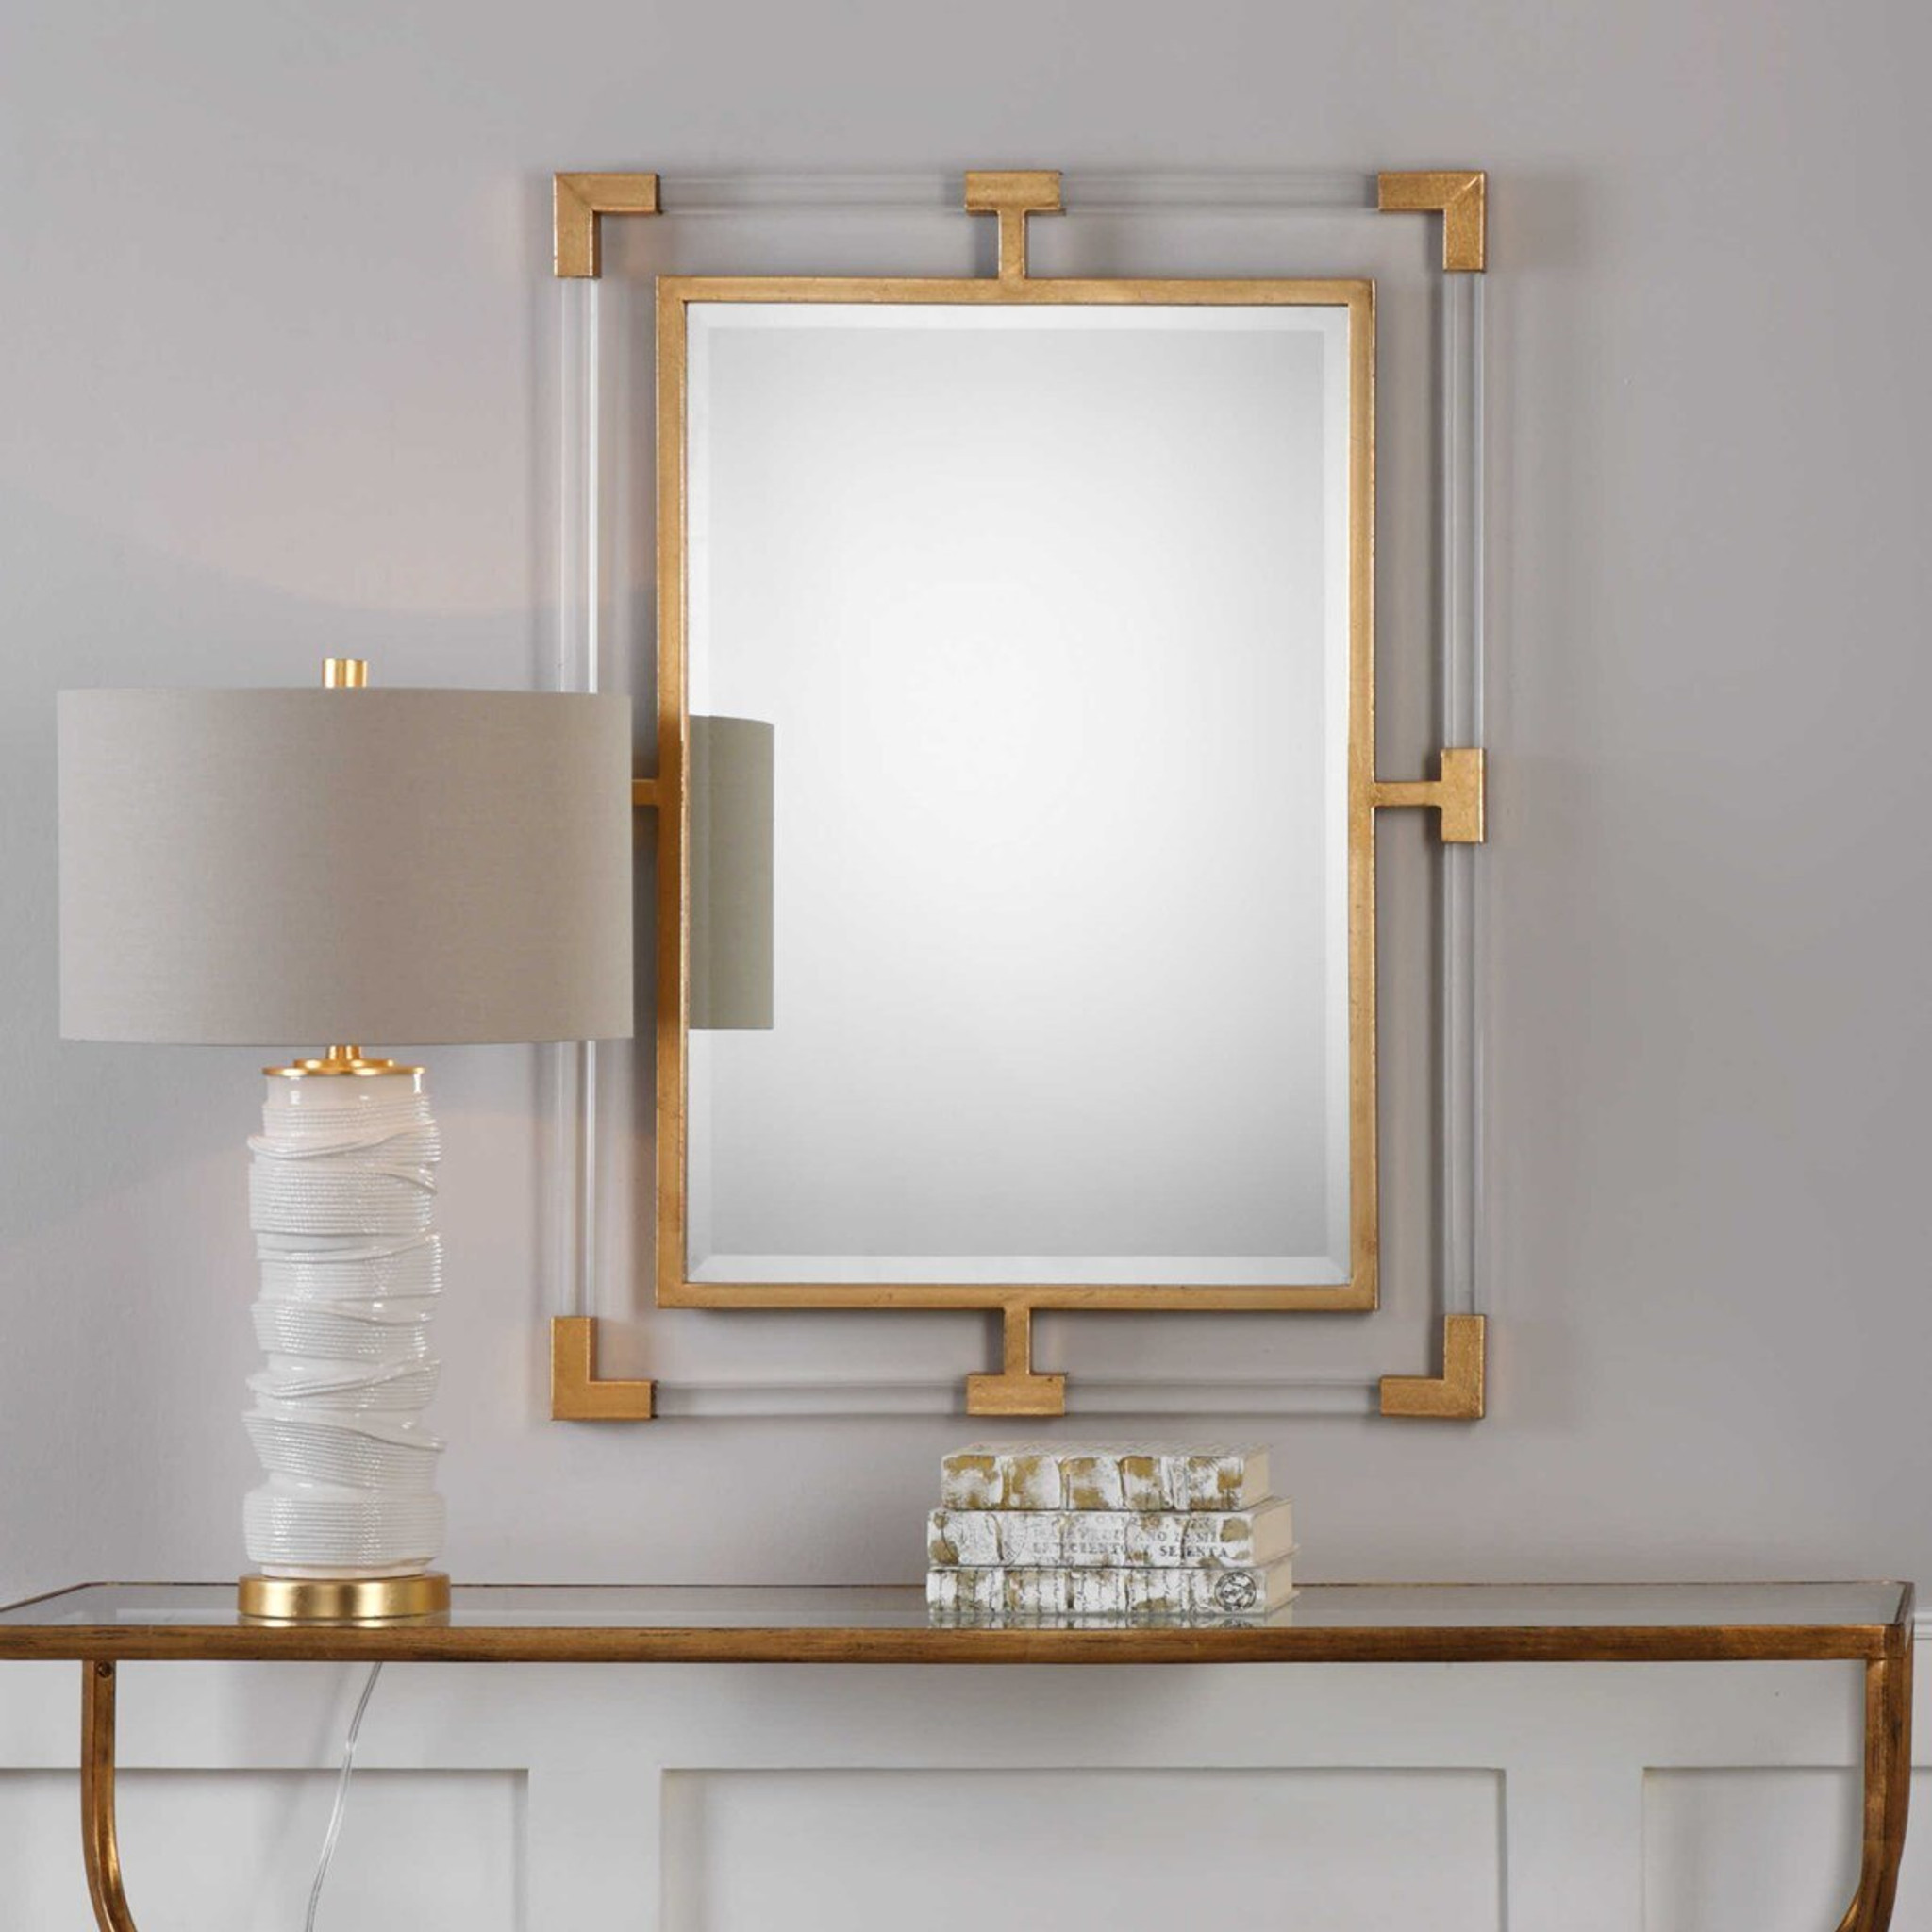 uttermost Balkan mirror clear acrylic lucite and gold brass accents rectangular